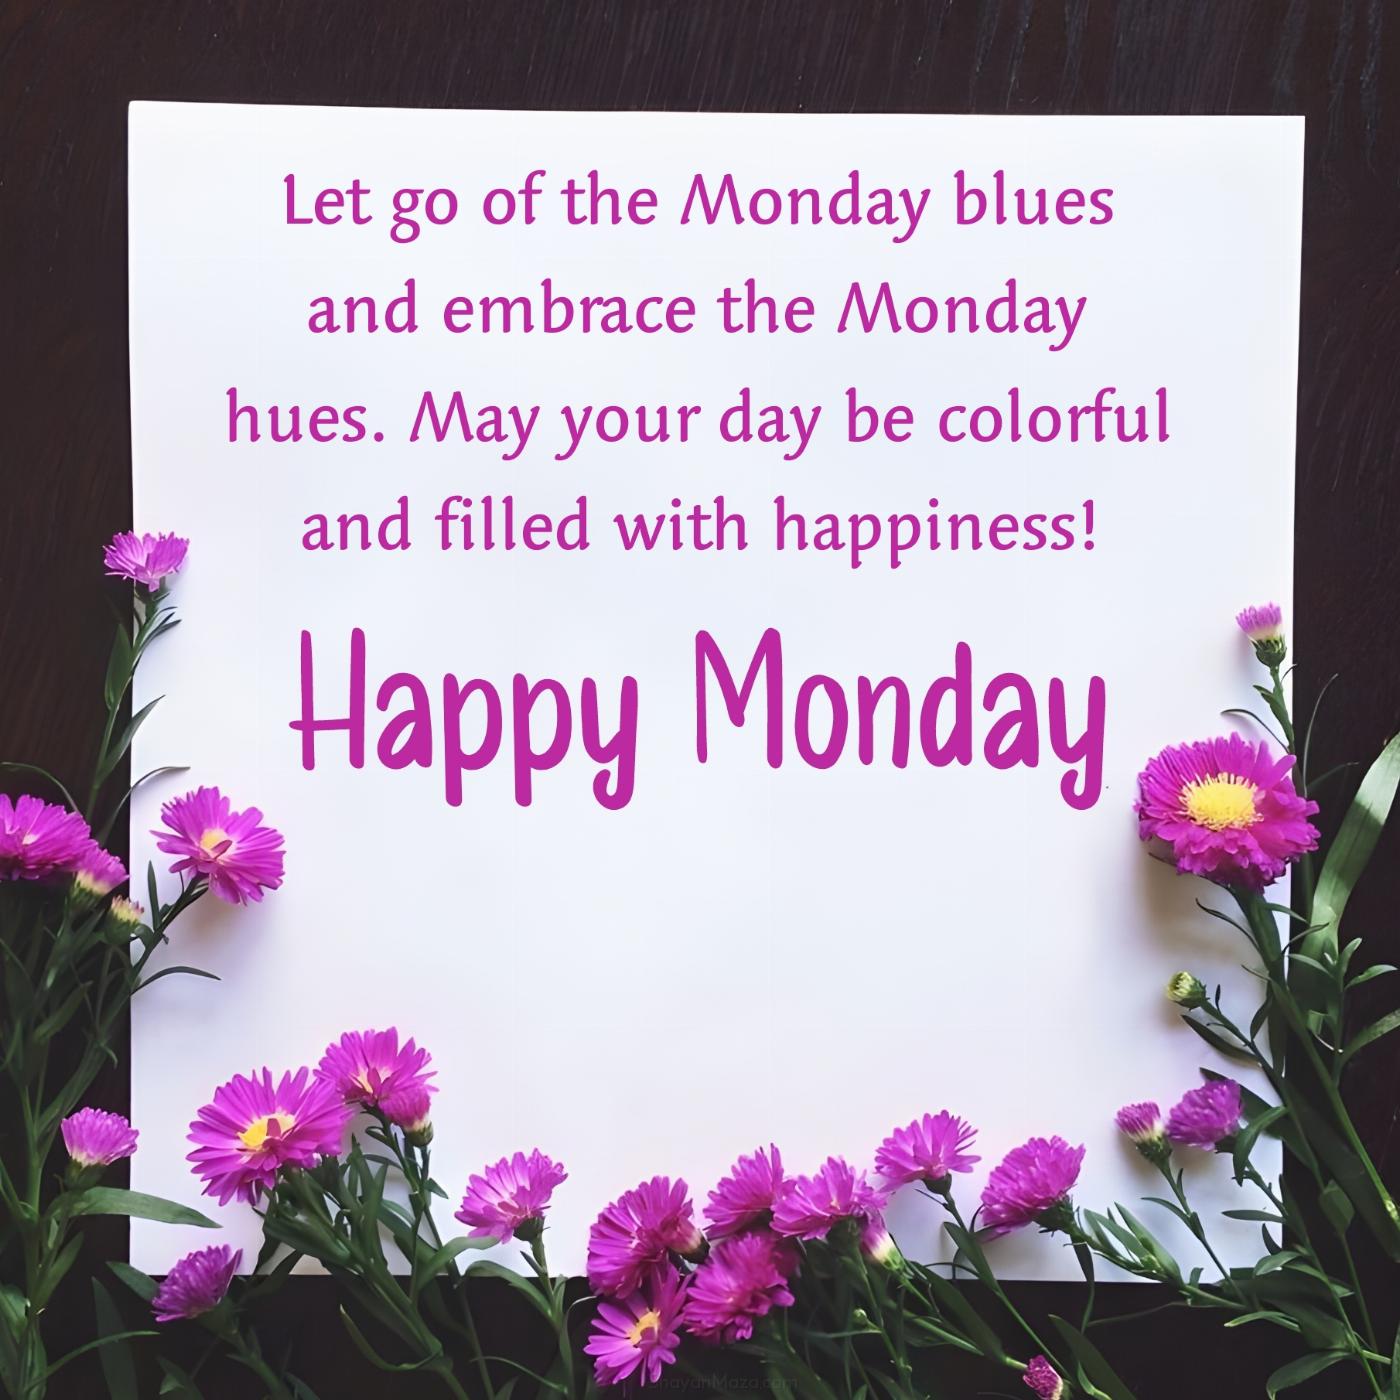 Let go of the Monday blues and embrace the Monday hues